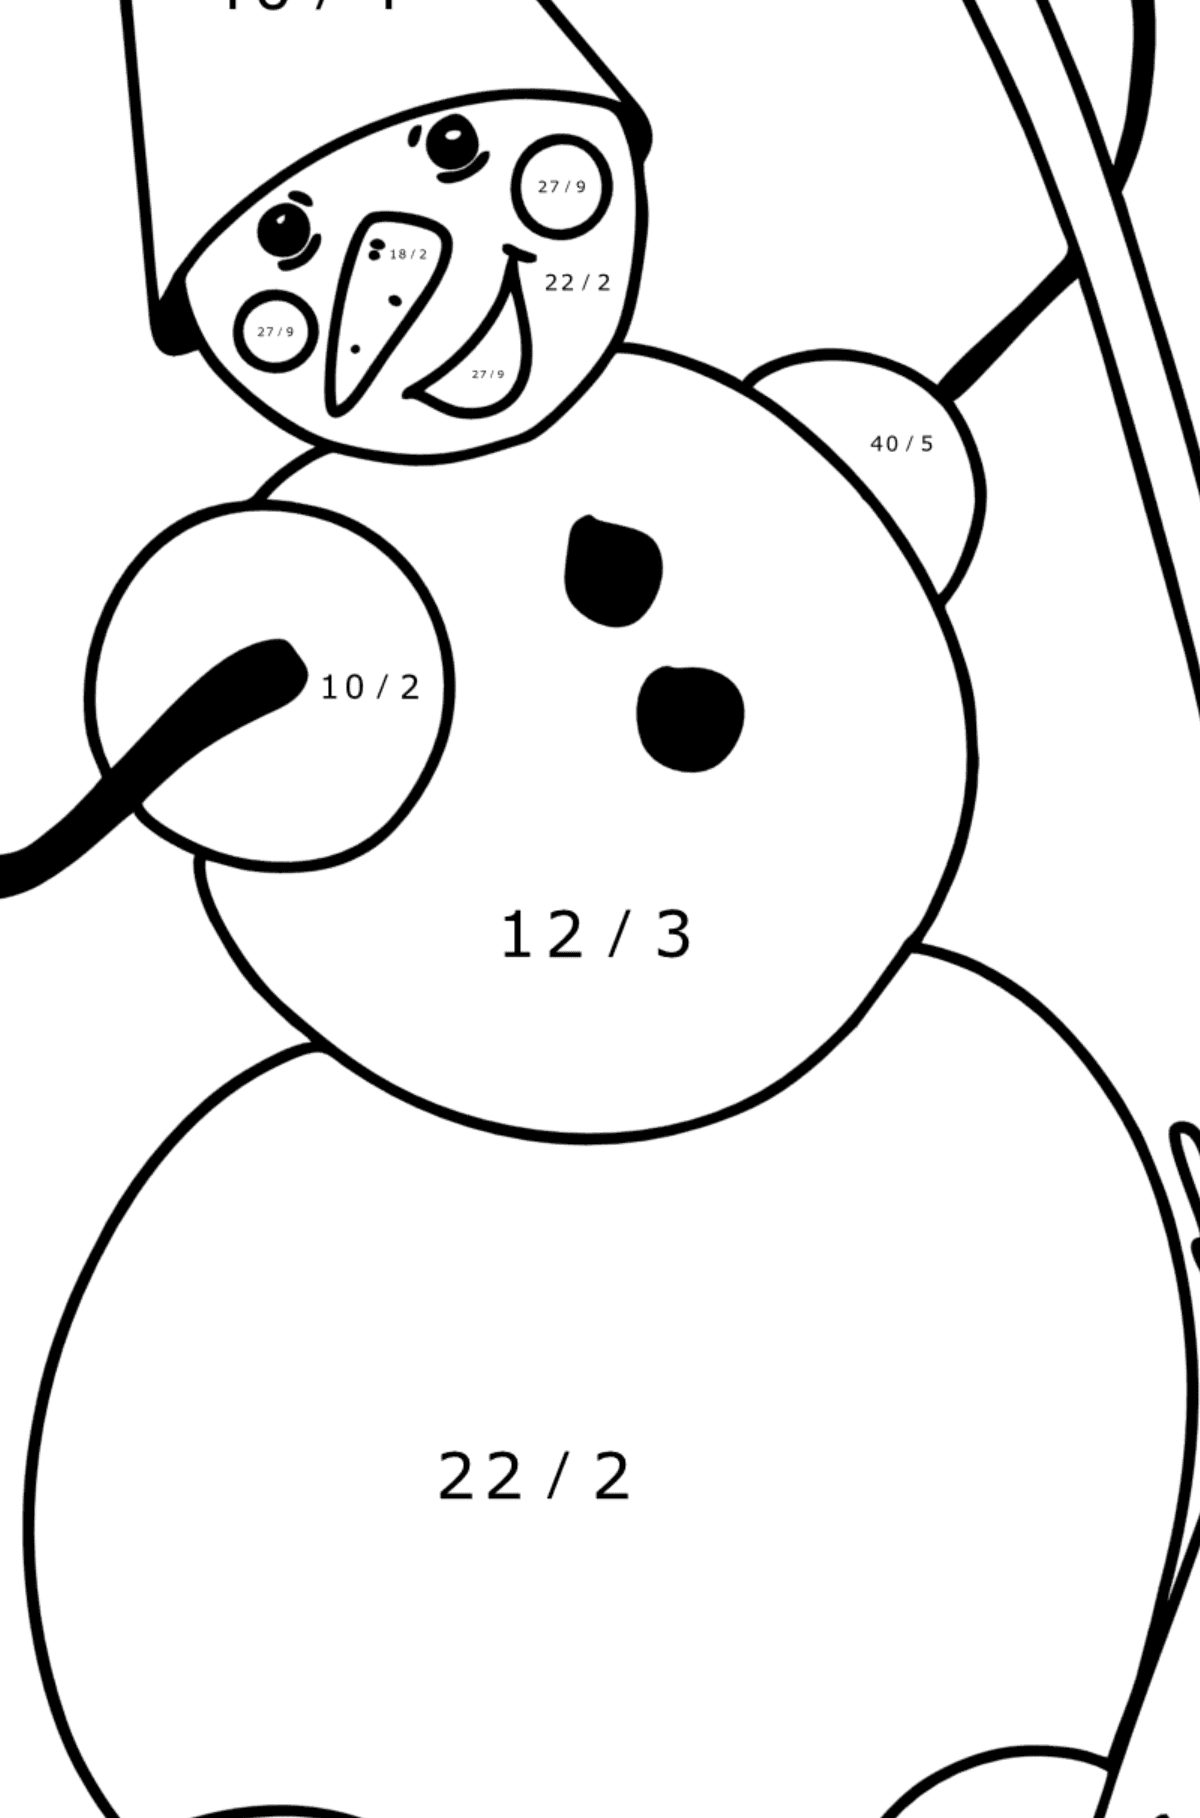 Snowman with Broom coloring page - Math Coloring - Division for Kids